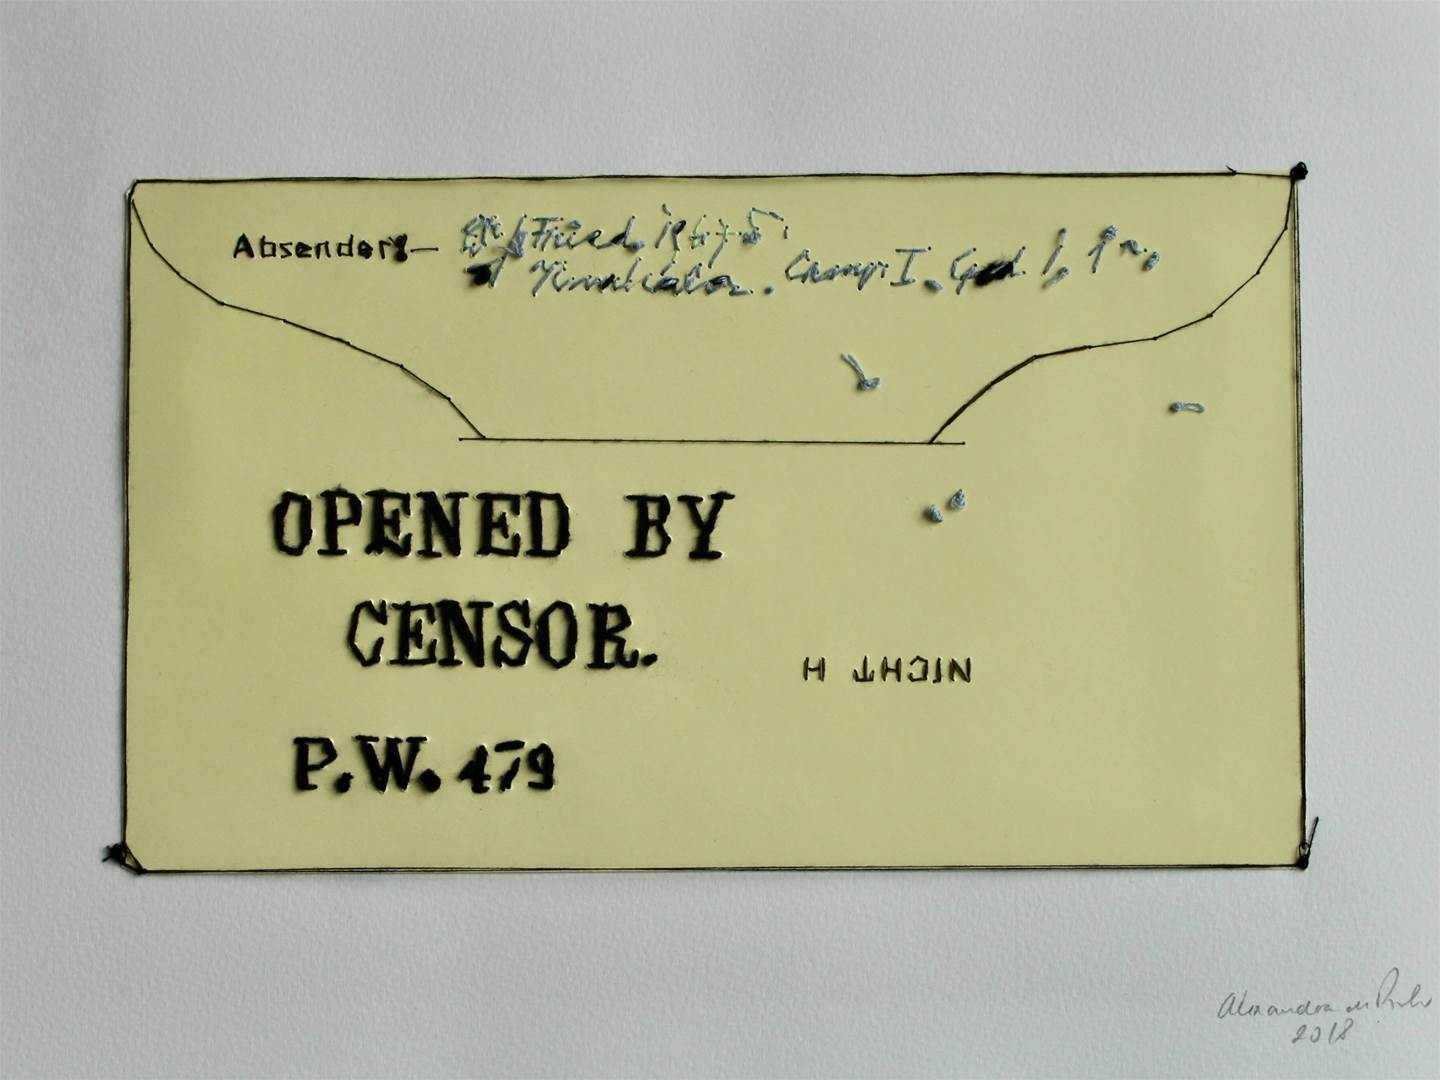 Openend by censor, original Minimalist Paper Drawing and Illustration by Alexandra de Pinho